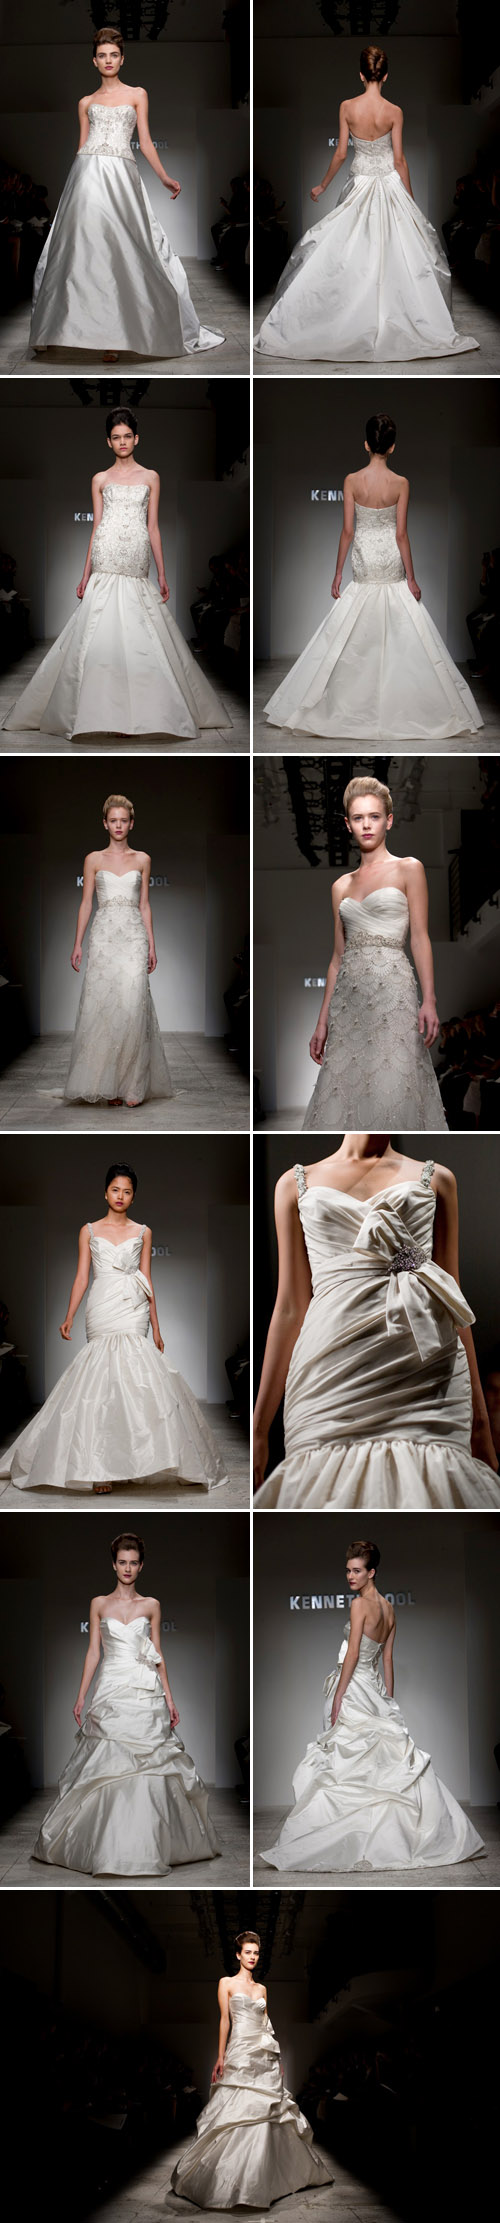 Kenneth Pool spring 2011 wedding dress collection, New York Bridal Market, photos by John and Joseph Photography